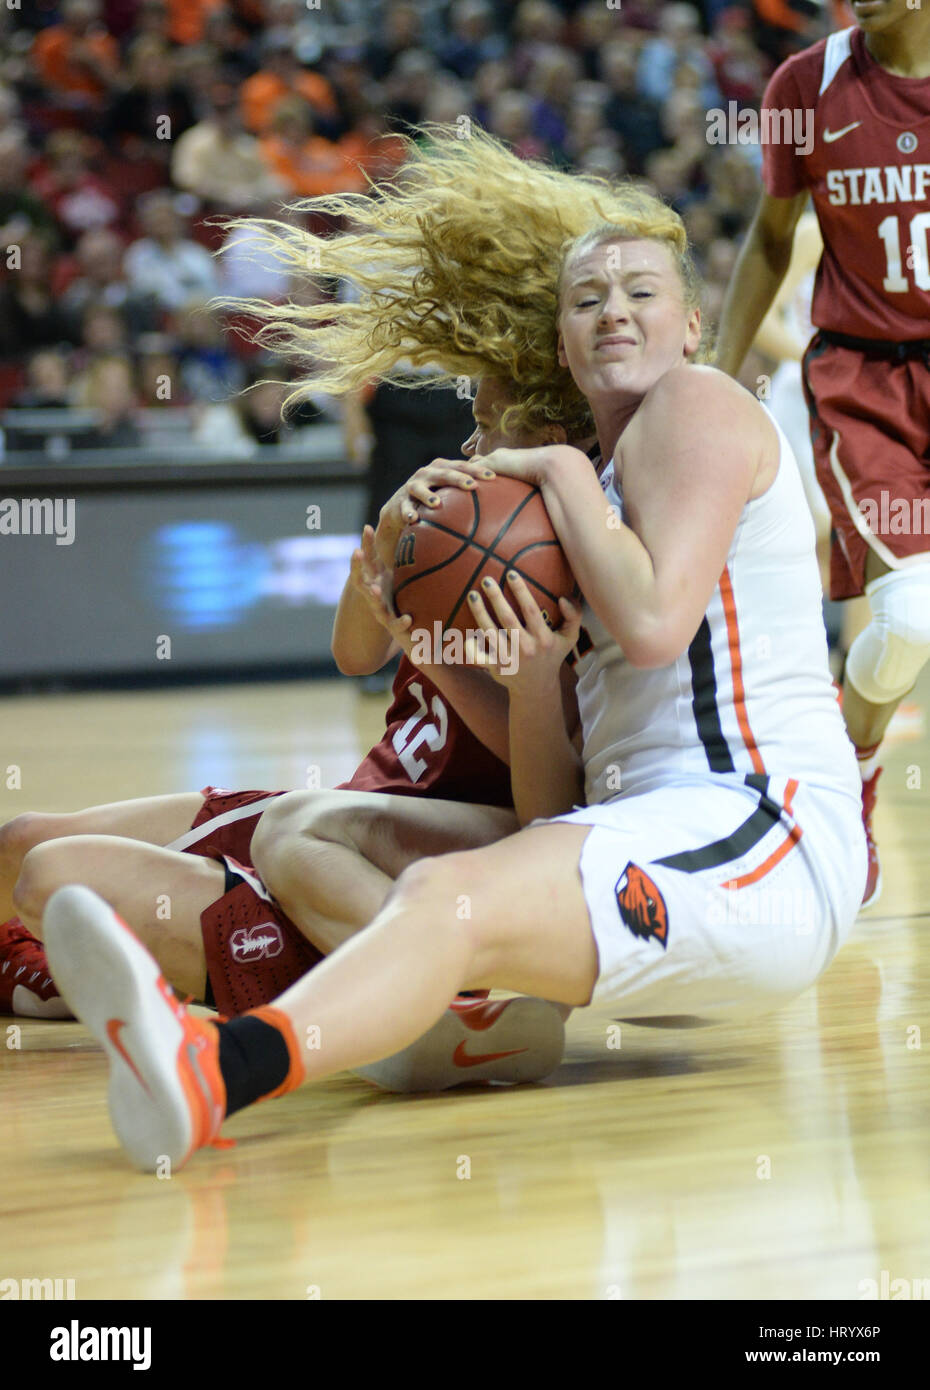 Seattle, WA, USA. 5th Mar, 2017. Stanford's Brittany McPhee (12) and OSU's Marie Gulich (21) fight for a loose ball during the PAC12 women's tournament final between the Oregon State Beavers and the Stanford Cardinal. The game was played at Key Arena in Seattle, WA. Jeff Halstead/CSM/Alamy Live News Stock Photo